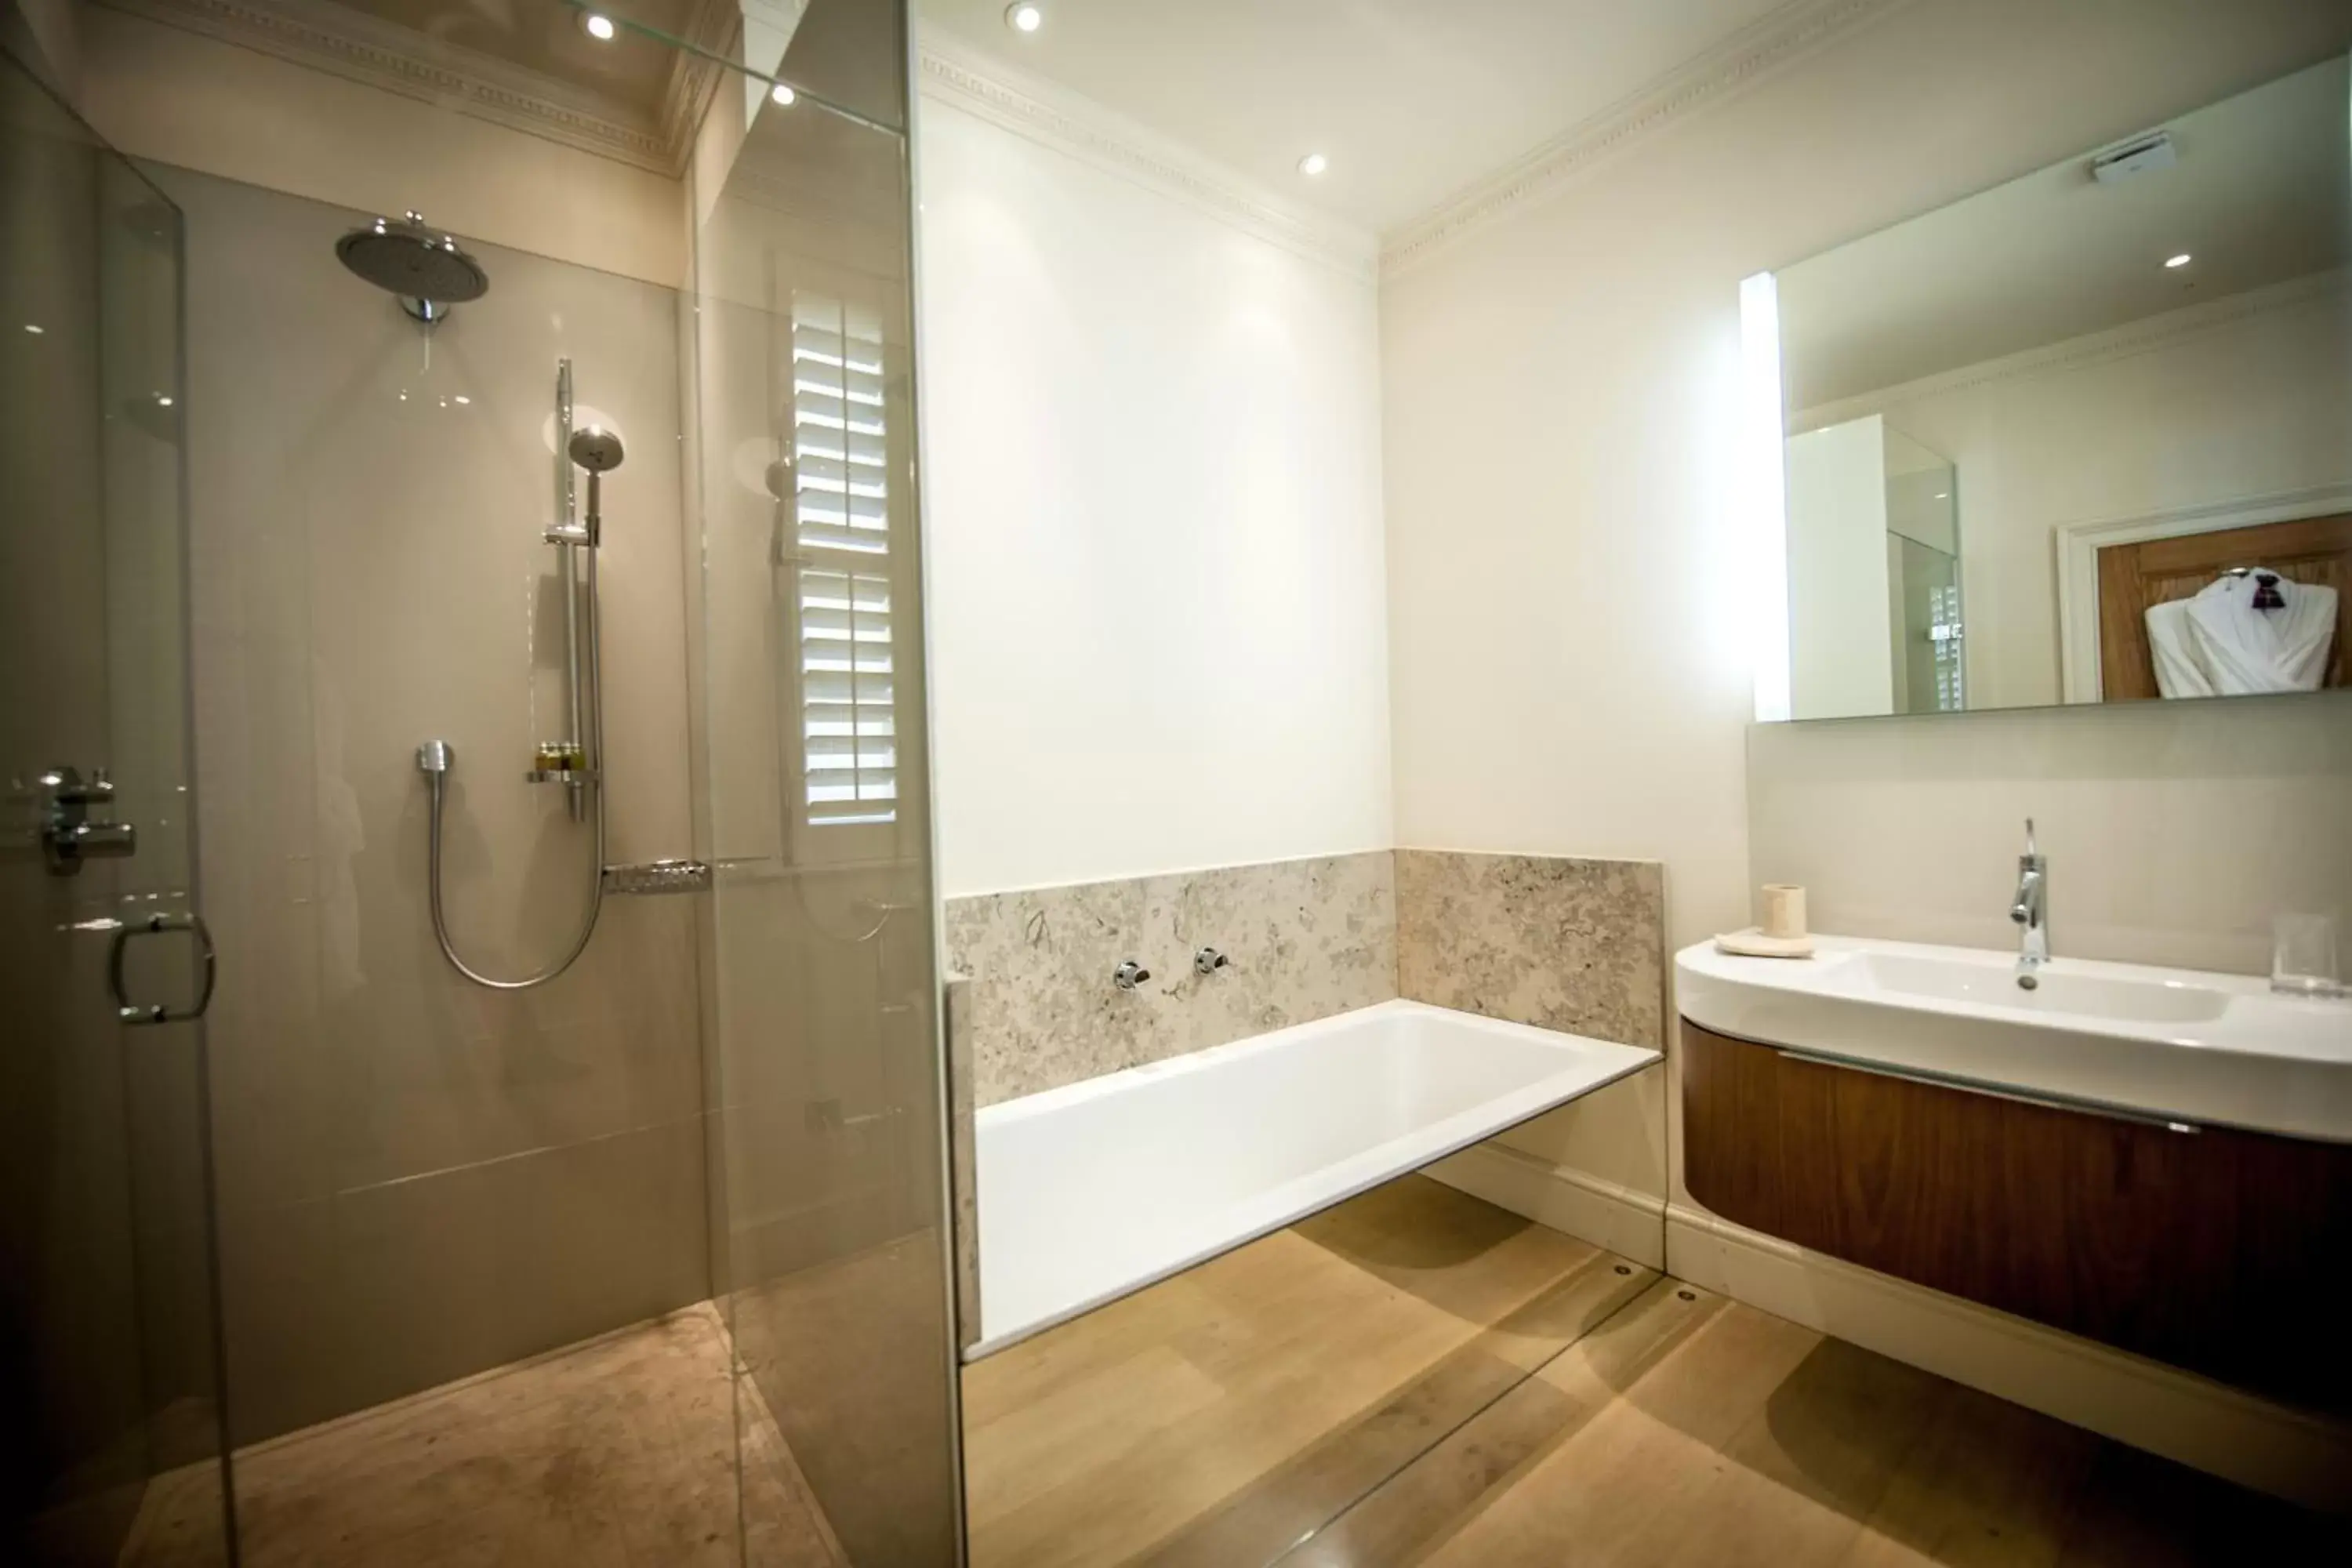 Bathroom in The Bath Priory - A Relais & Chateaux Hotel